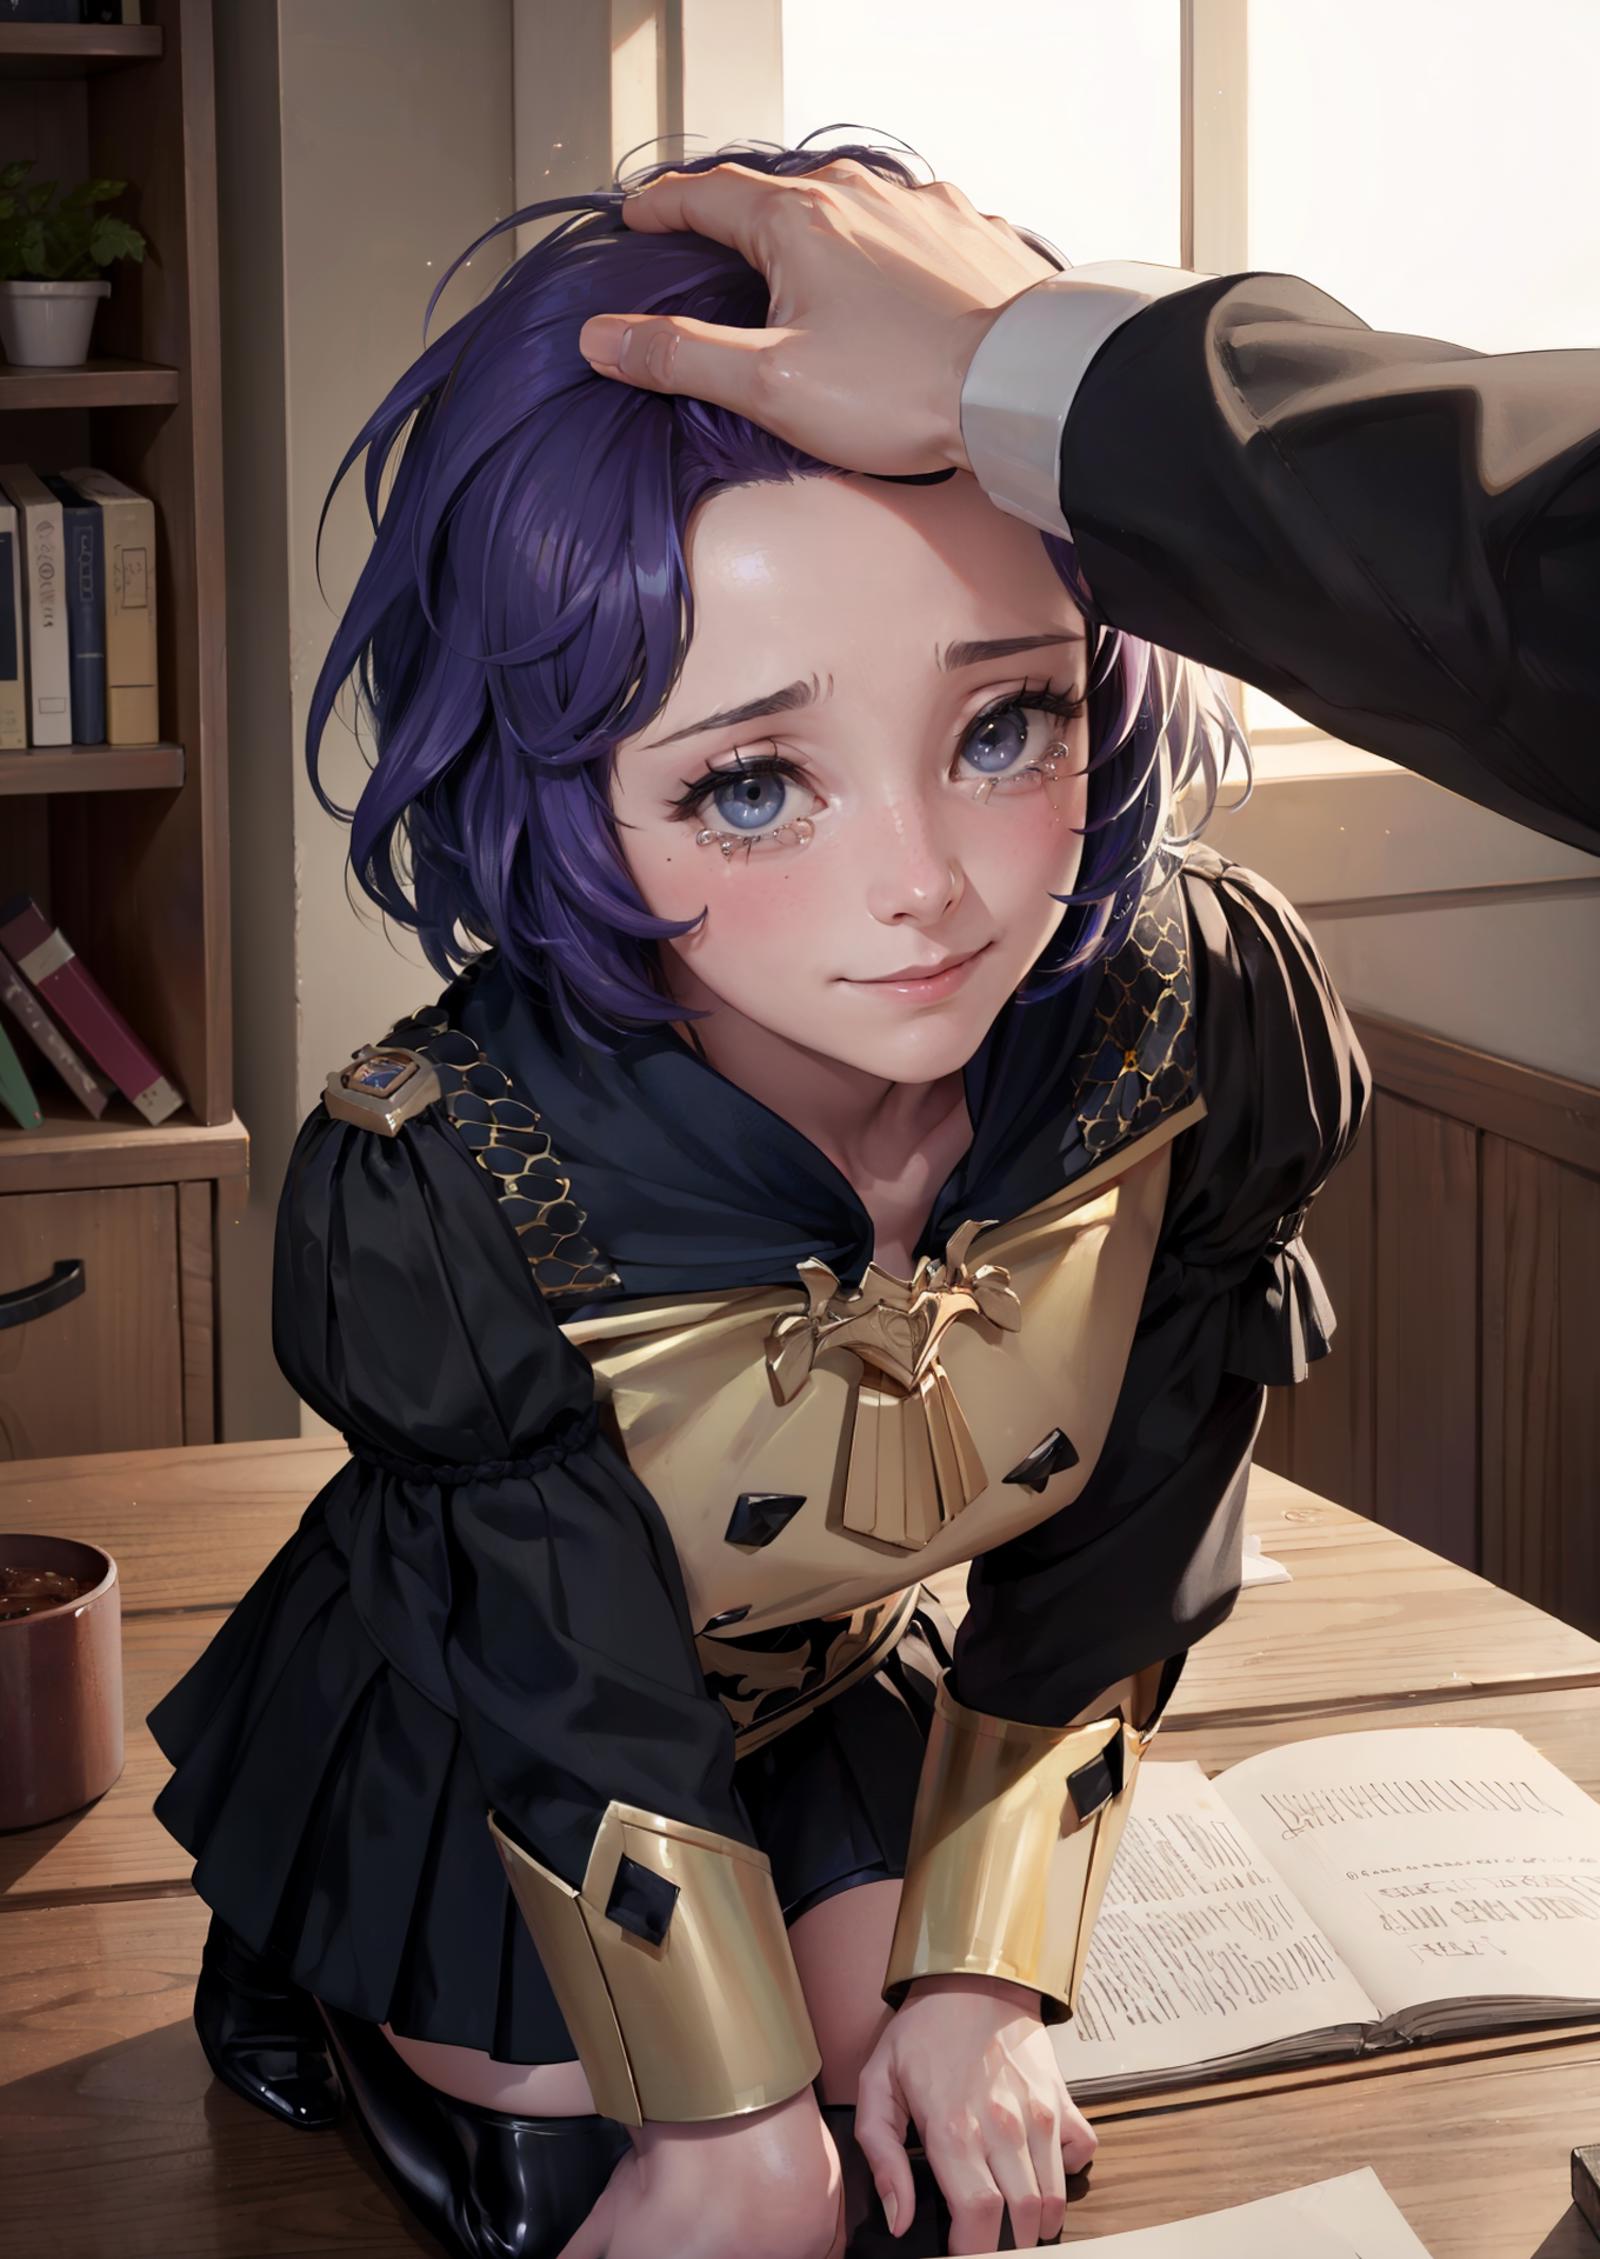 Headpat POV | Concept LoRA image by excess